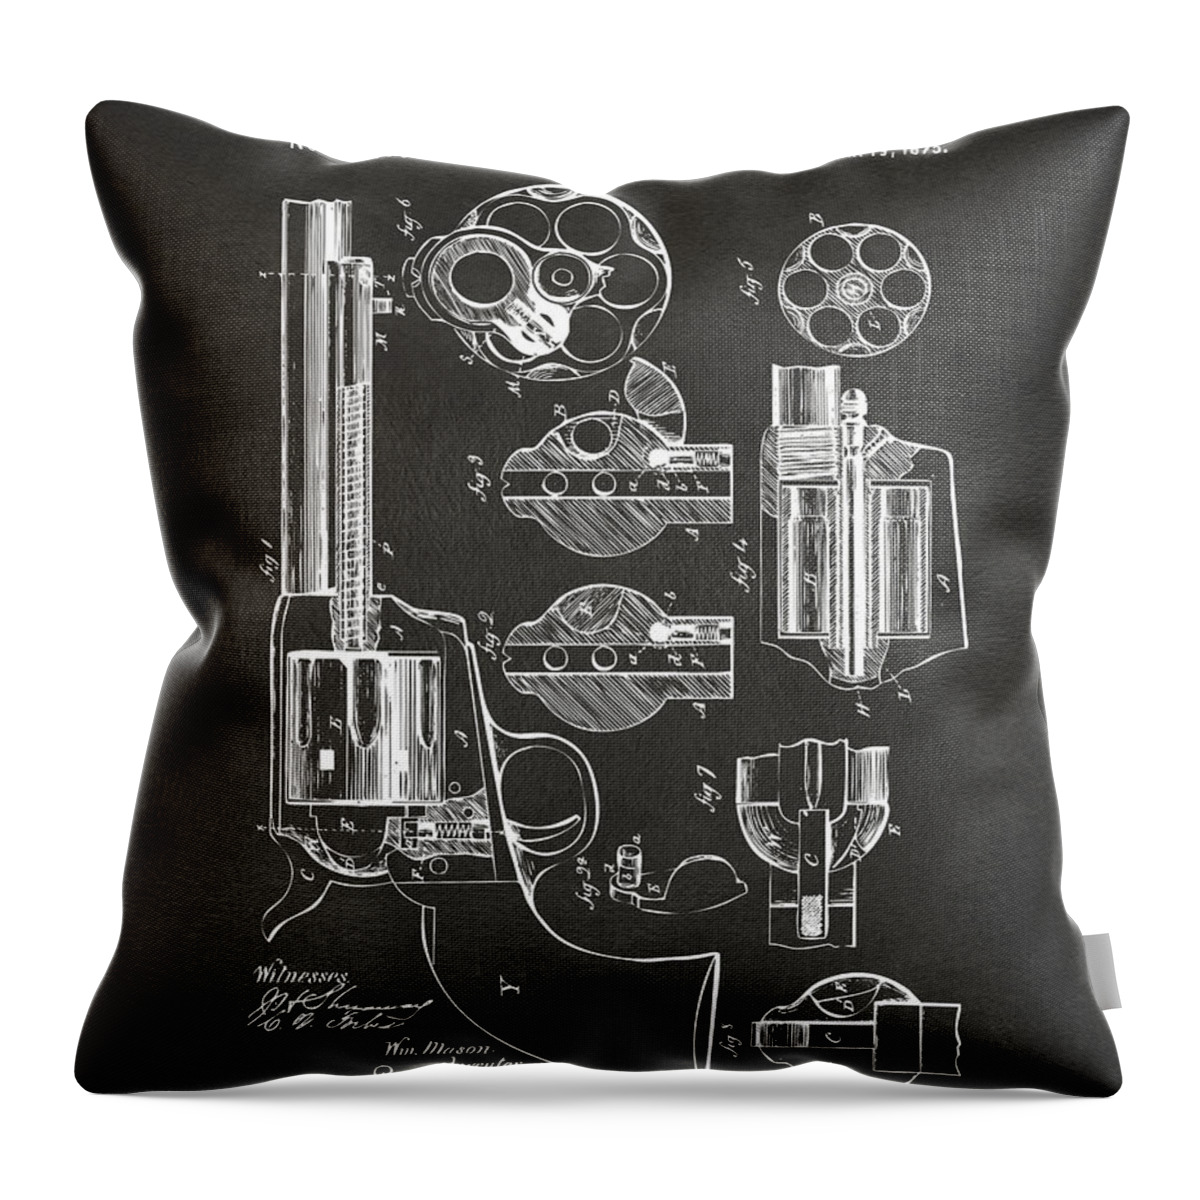 Colt Peacemaker Throw Pillow featuring the digital art 1875 Colt Peacemaker Revolver Patent Artwork - Gray by Nikki Marie Smith